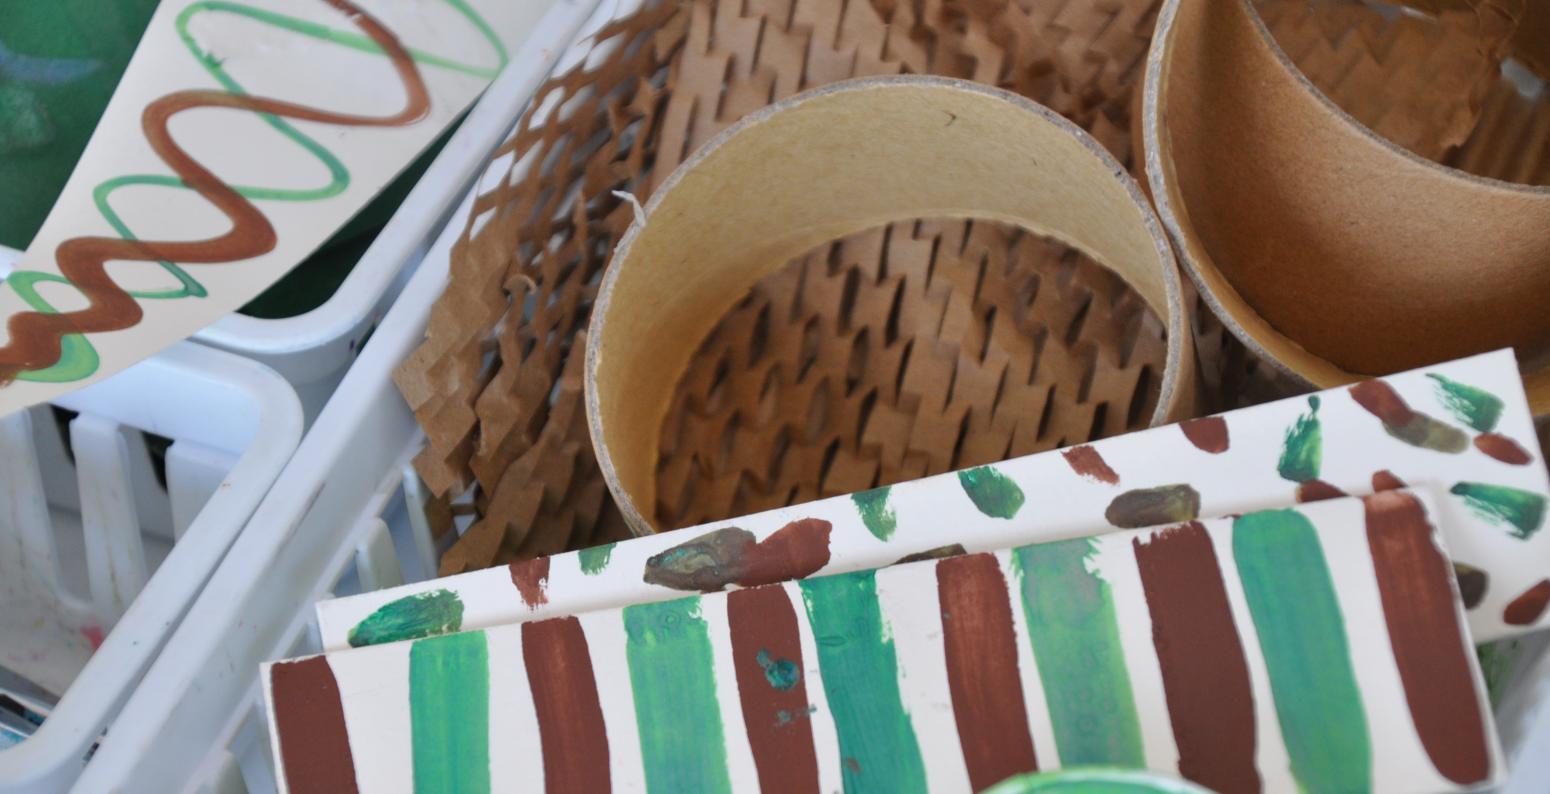 A basket of green and brown paper materials.